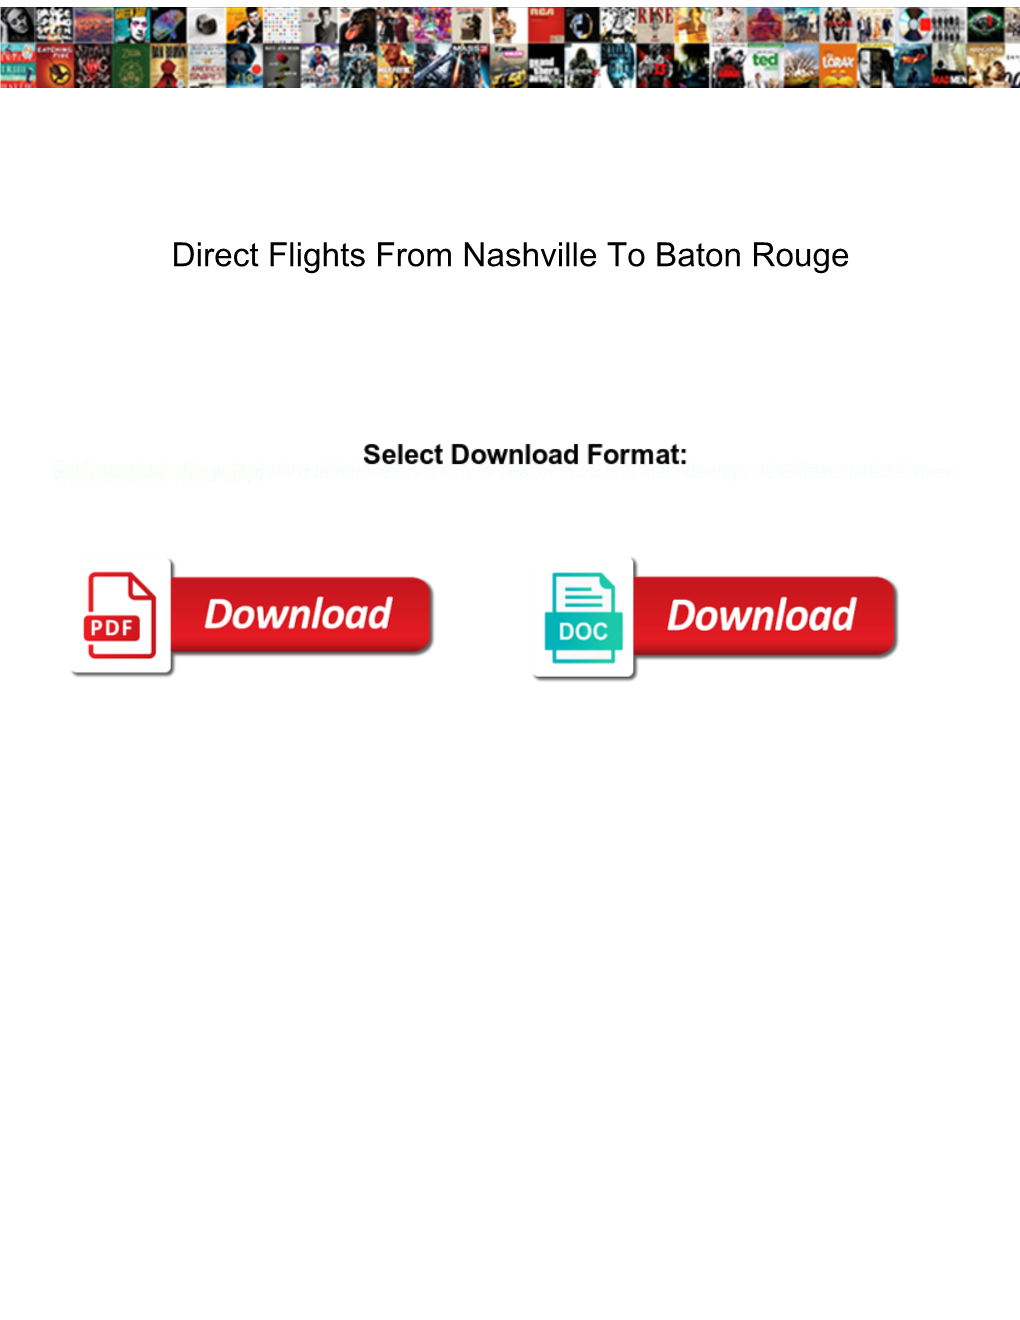 Direct Flights from Nashville to Baton Rouge